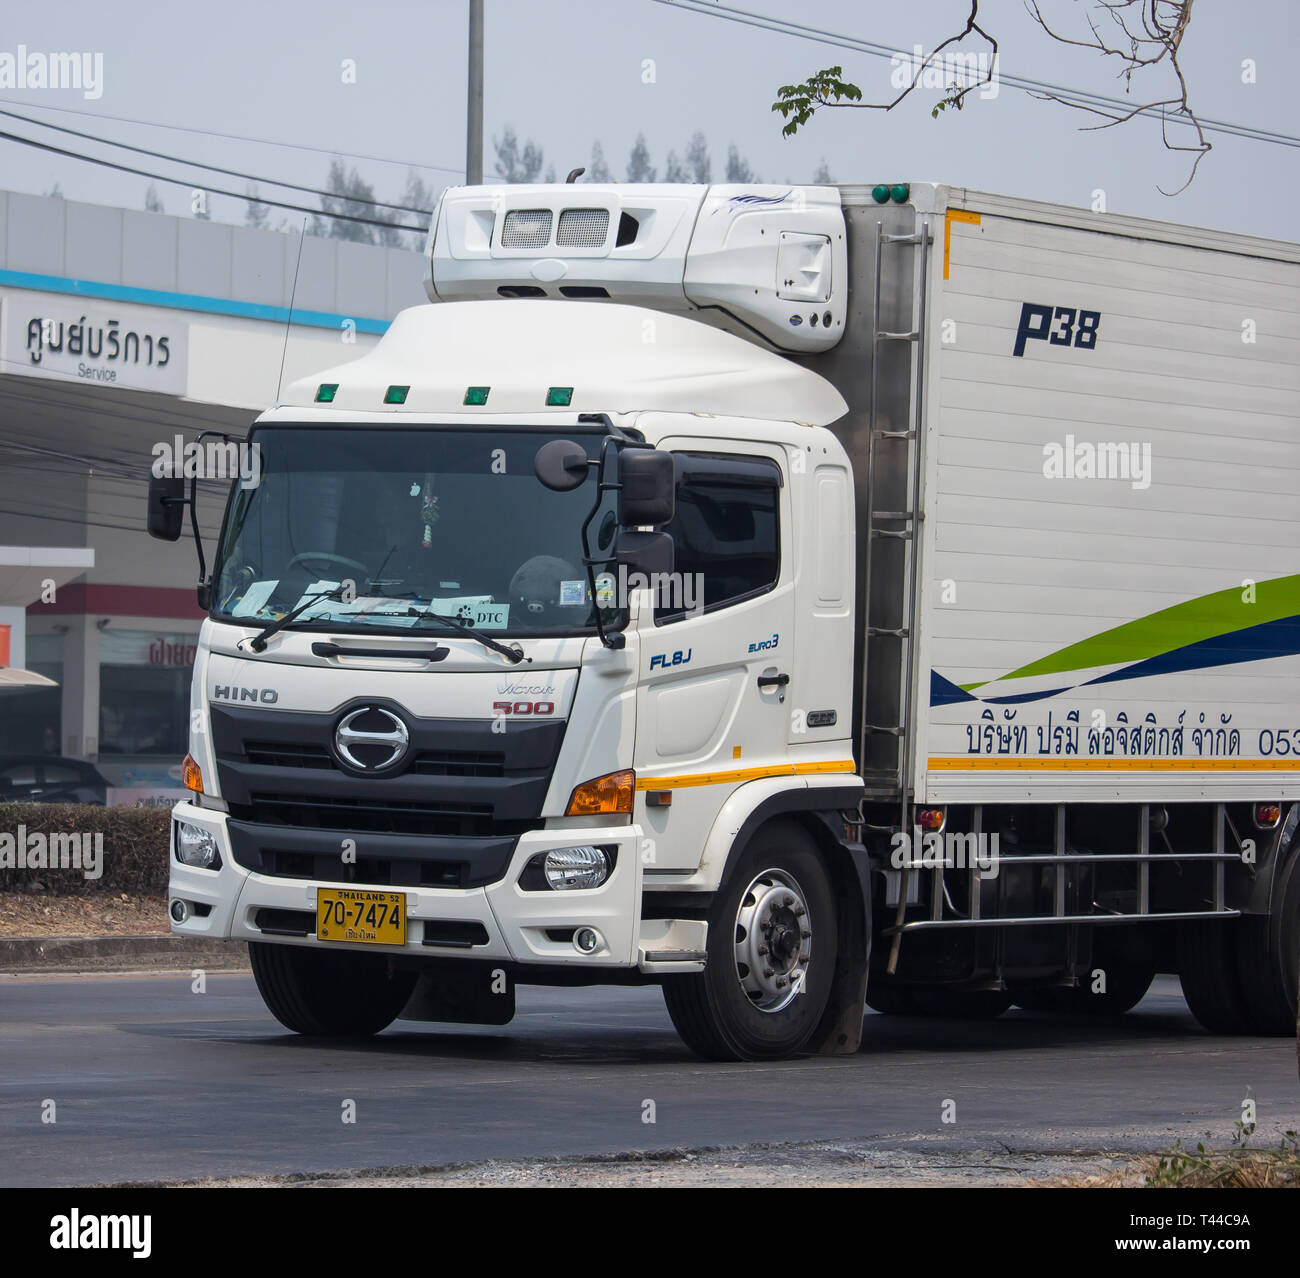 Chiangmai, Thailand - April 5 2019: Container truck of Parame Logistics Transportation company. Photo at road no.121 about 8 km from downtown Chiangma Stock Photo